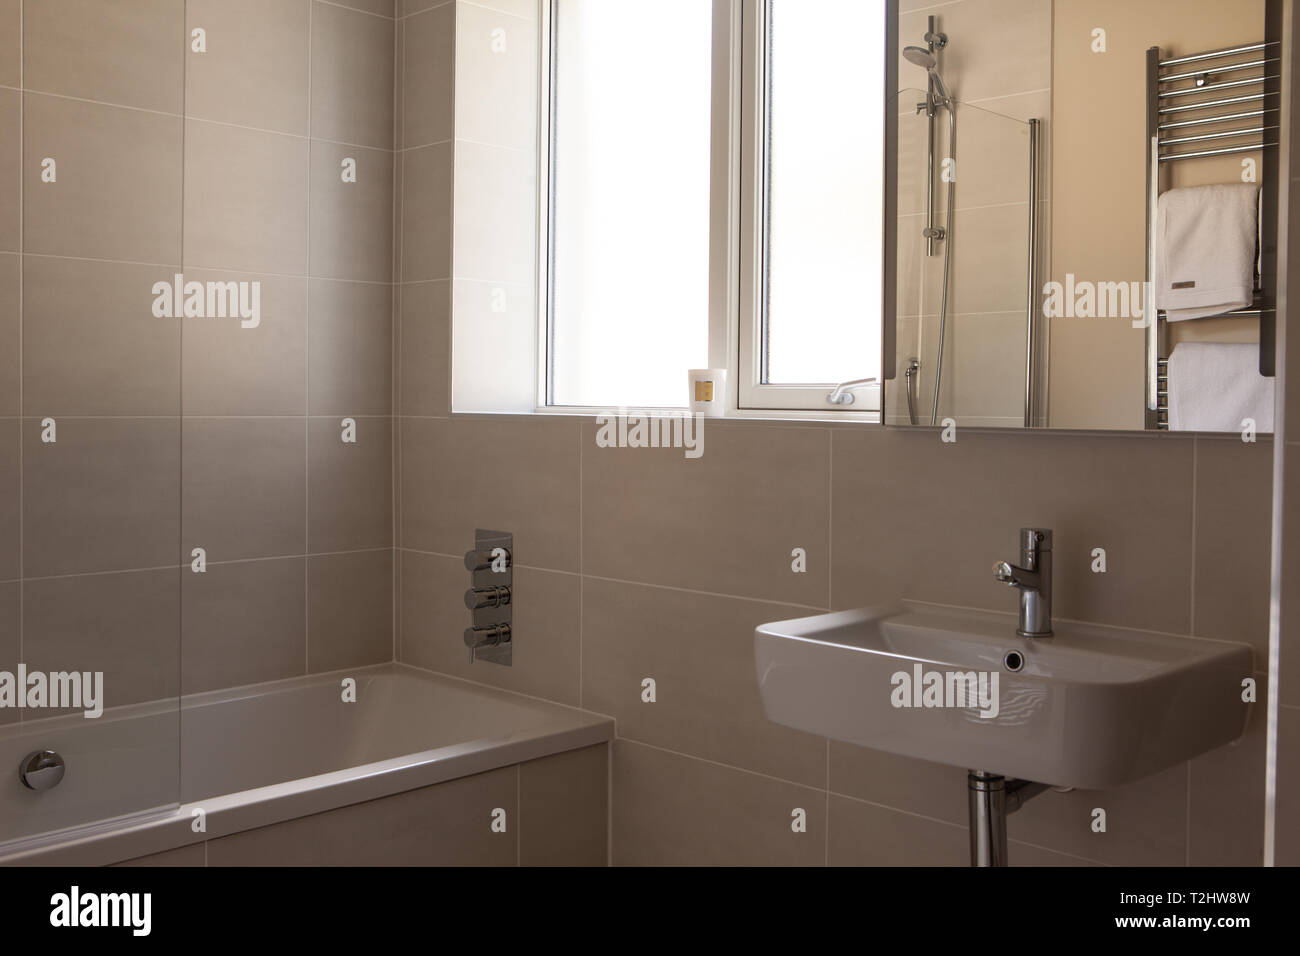 main bathroom with bath, sink and mirrored bathroom cabinet on the wall with bright light from window. Stock Photo